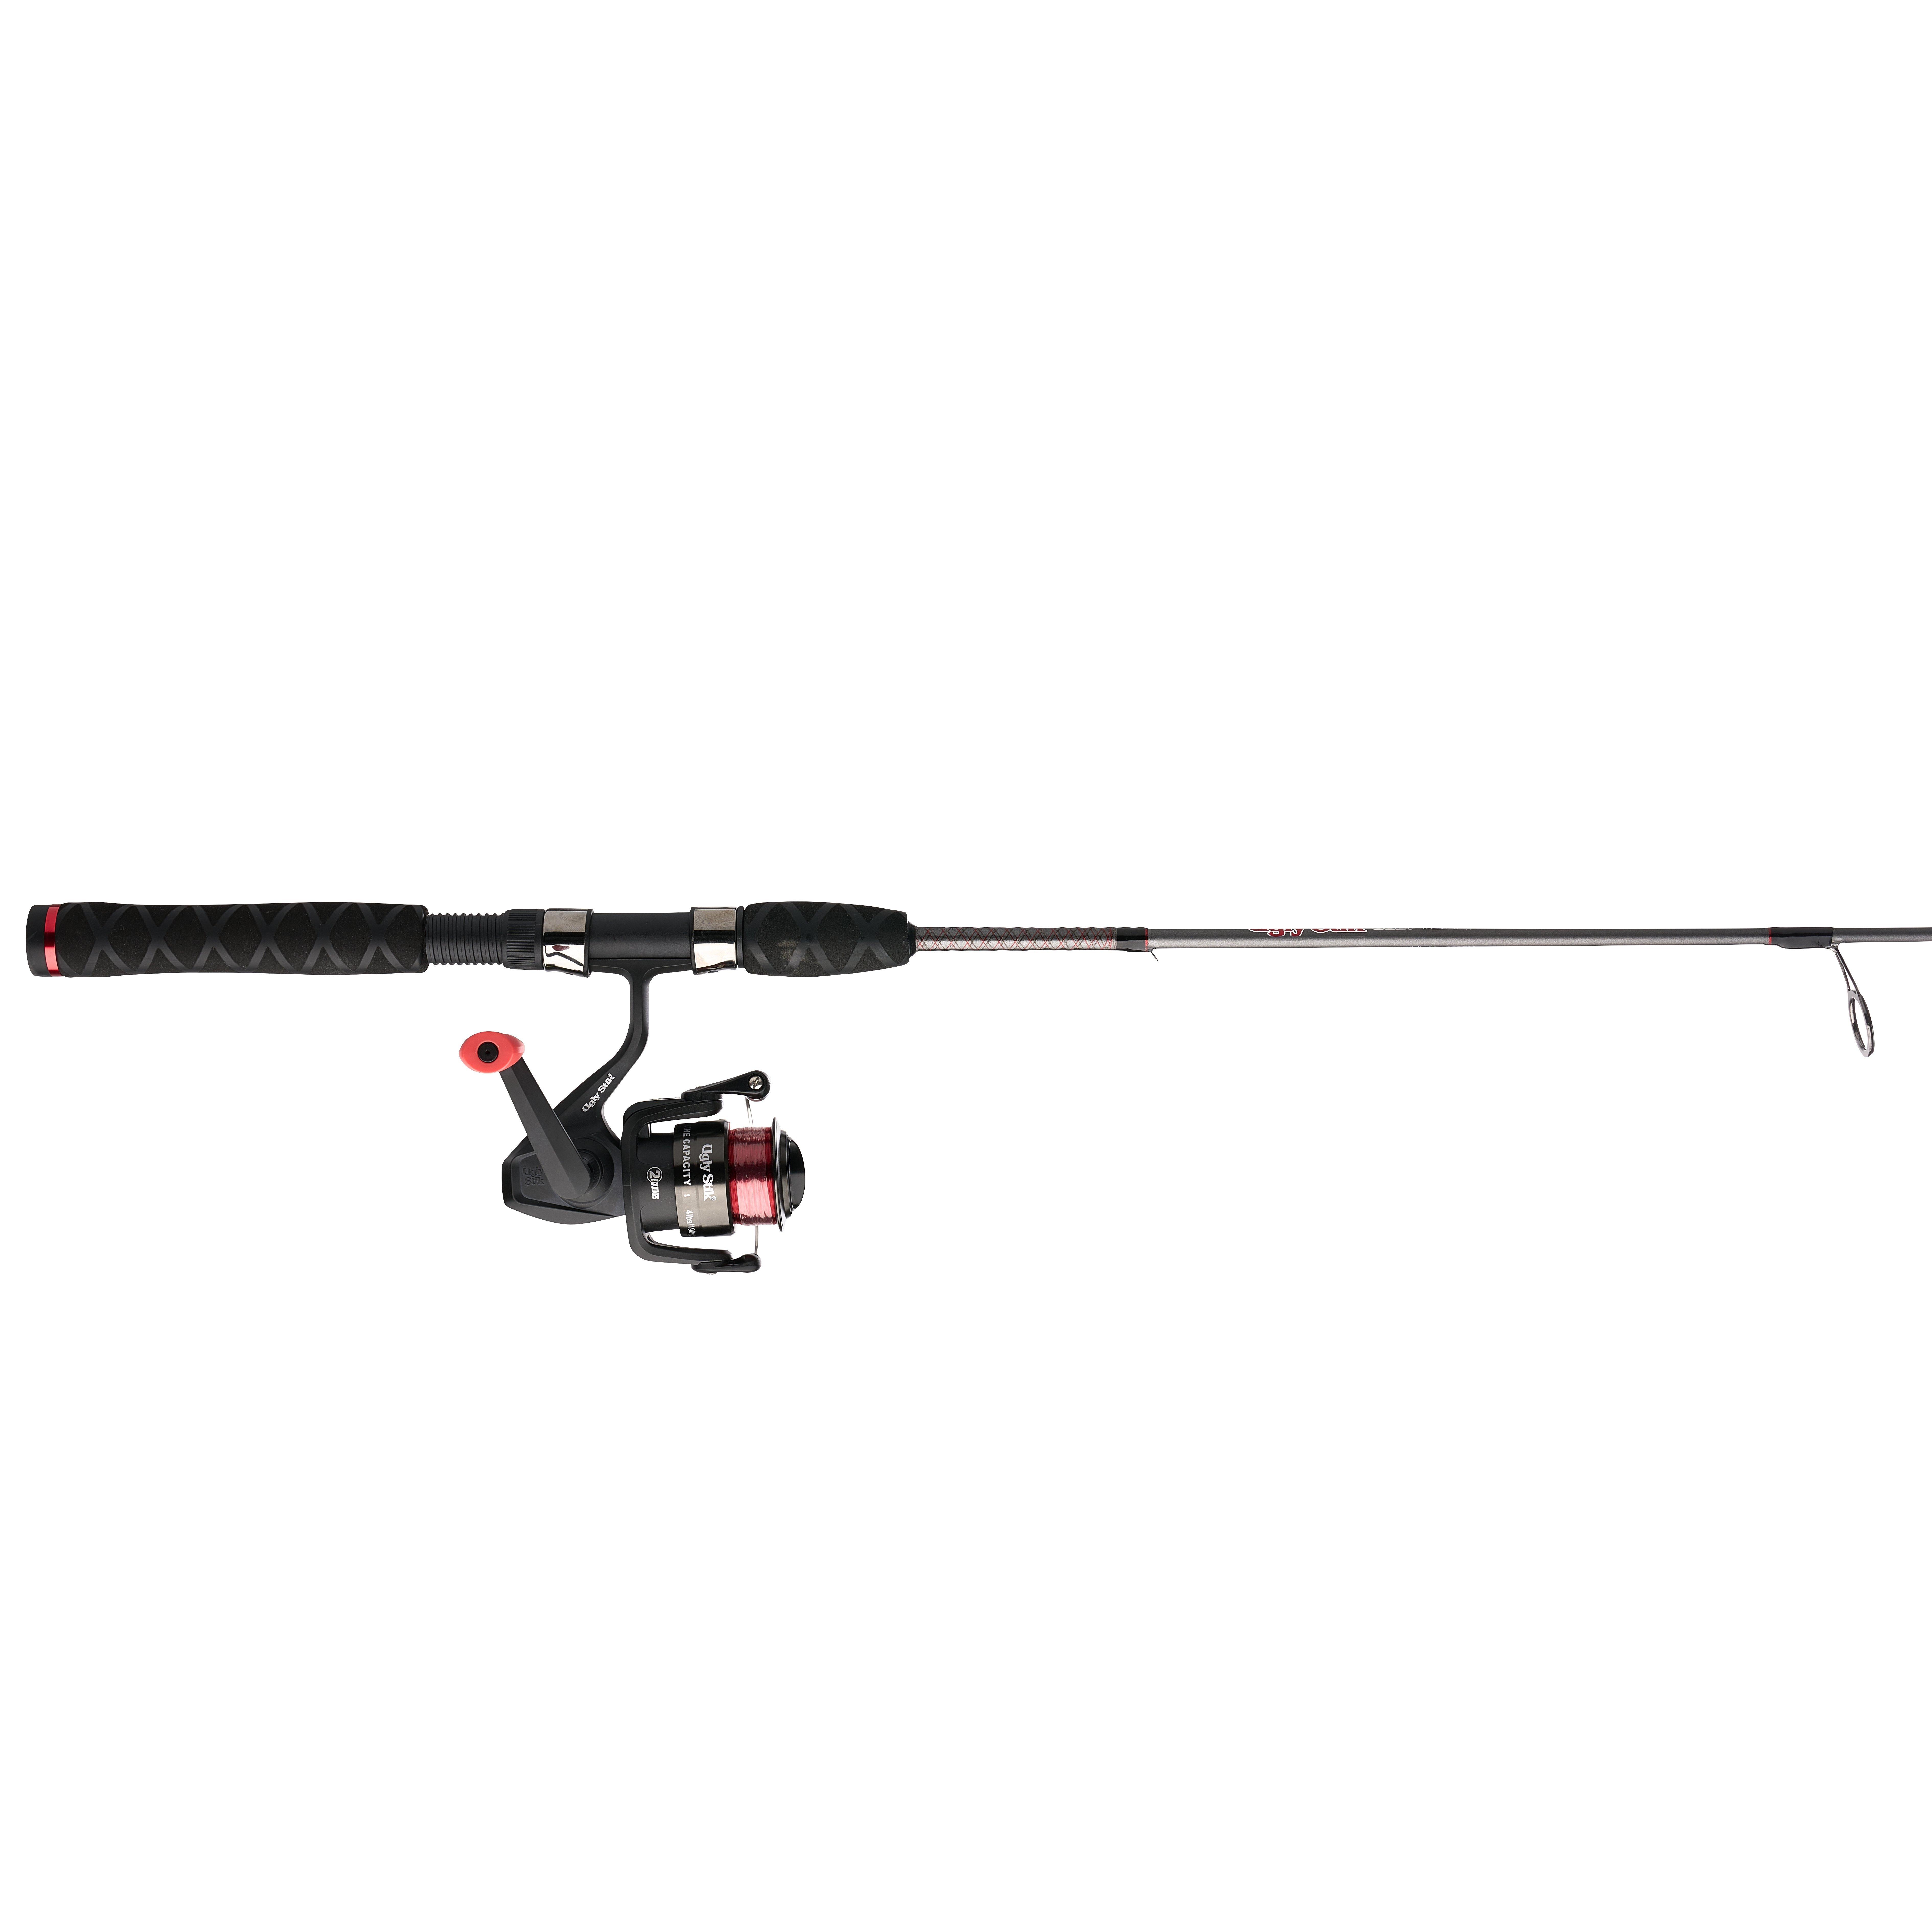 https://op1.0ps.us/original/opplanet-ugly-stik-ugly-tuff-8-spinning-combo-5-2-1-right-left-30-4ft-6in-rod-length-medium-power-moderate-fast-action-1-piece-rod-ustuffy461m-sp30cbo-main